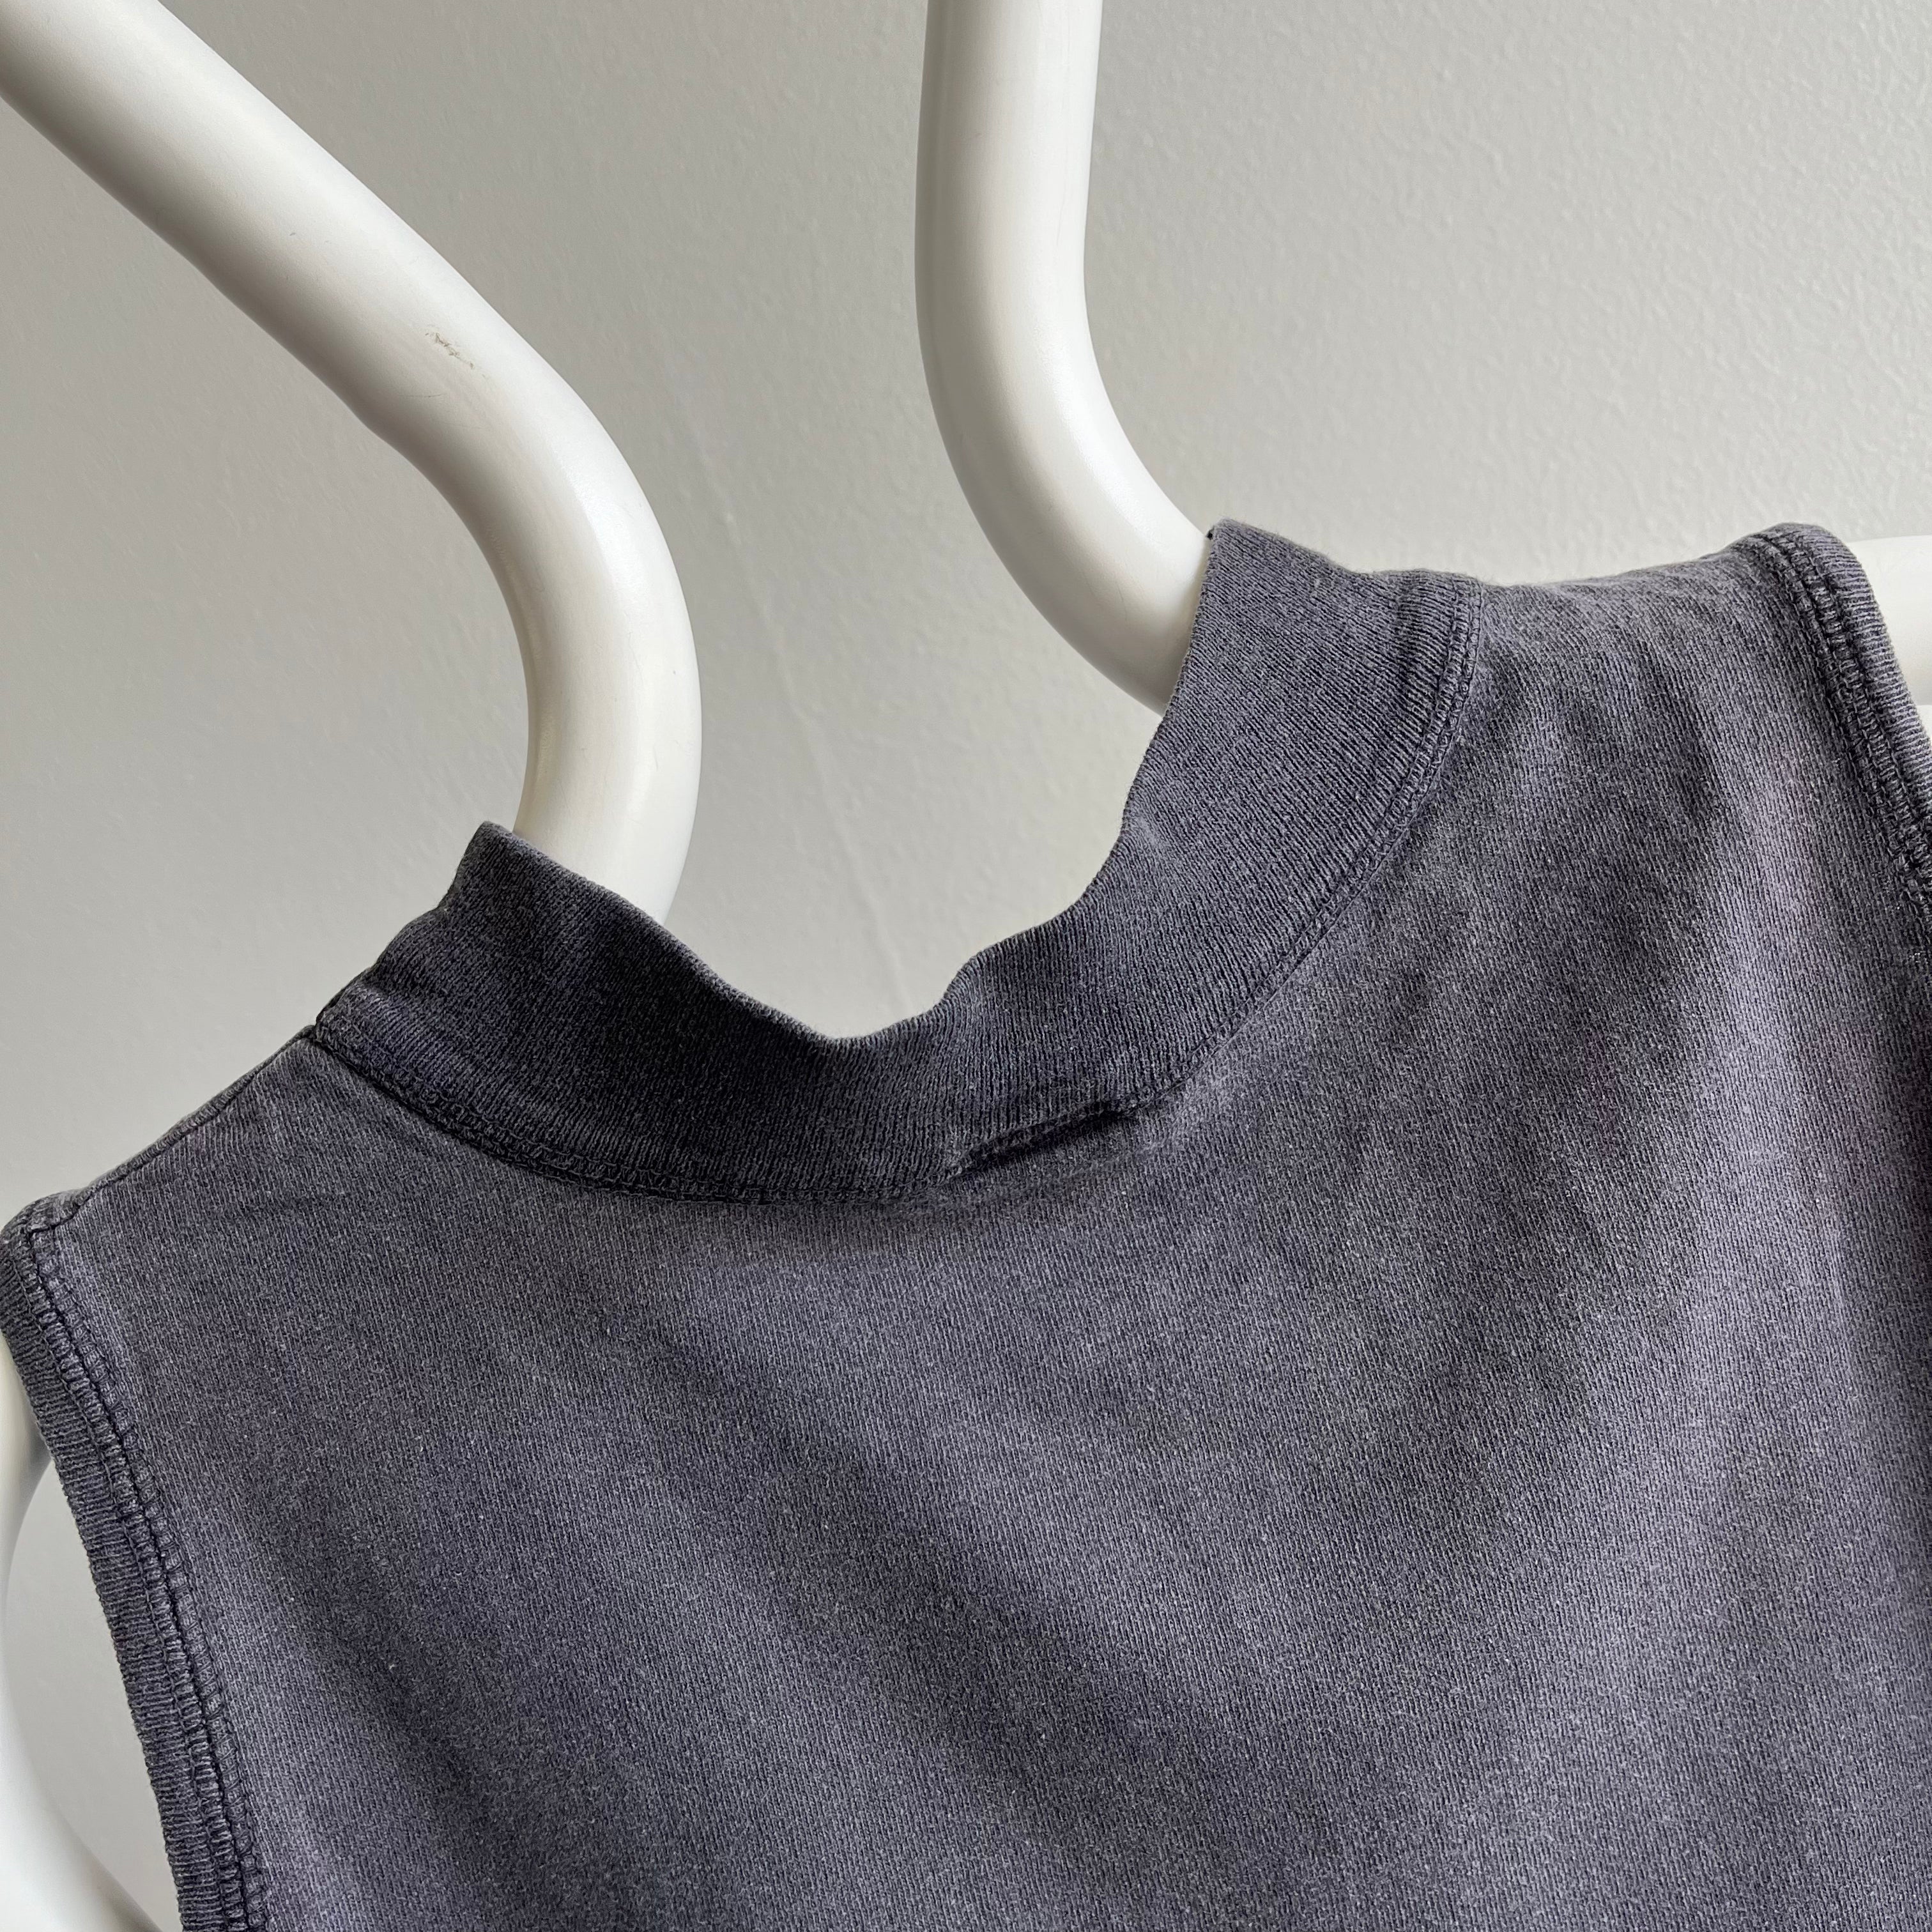 1980s USA Made Gap Faded Mock Neck Tank Top - THIS